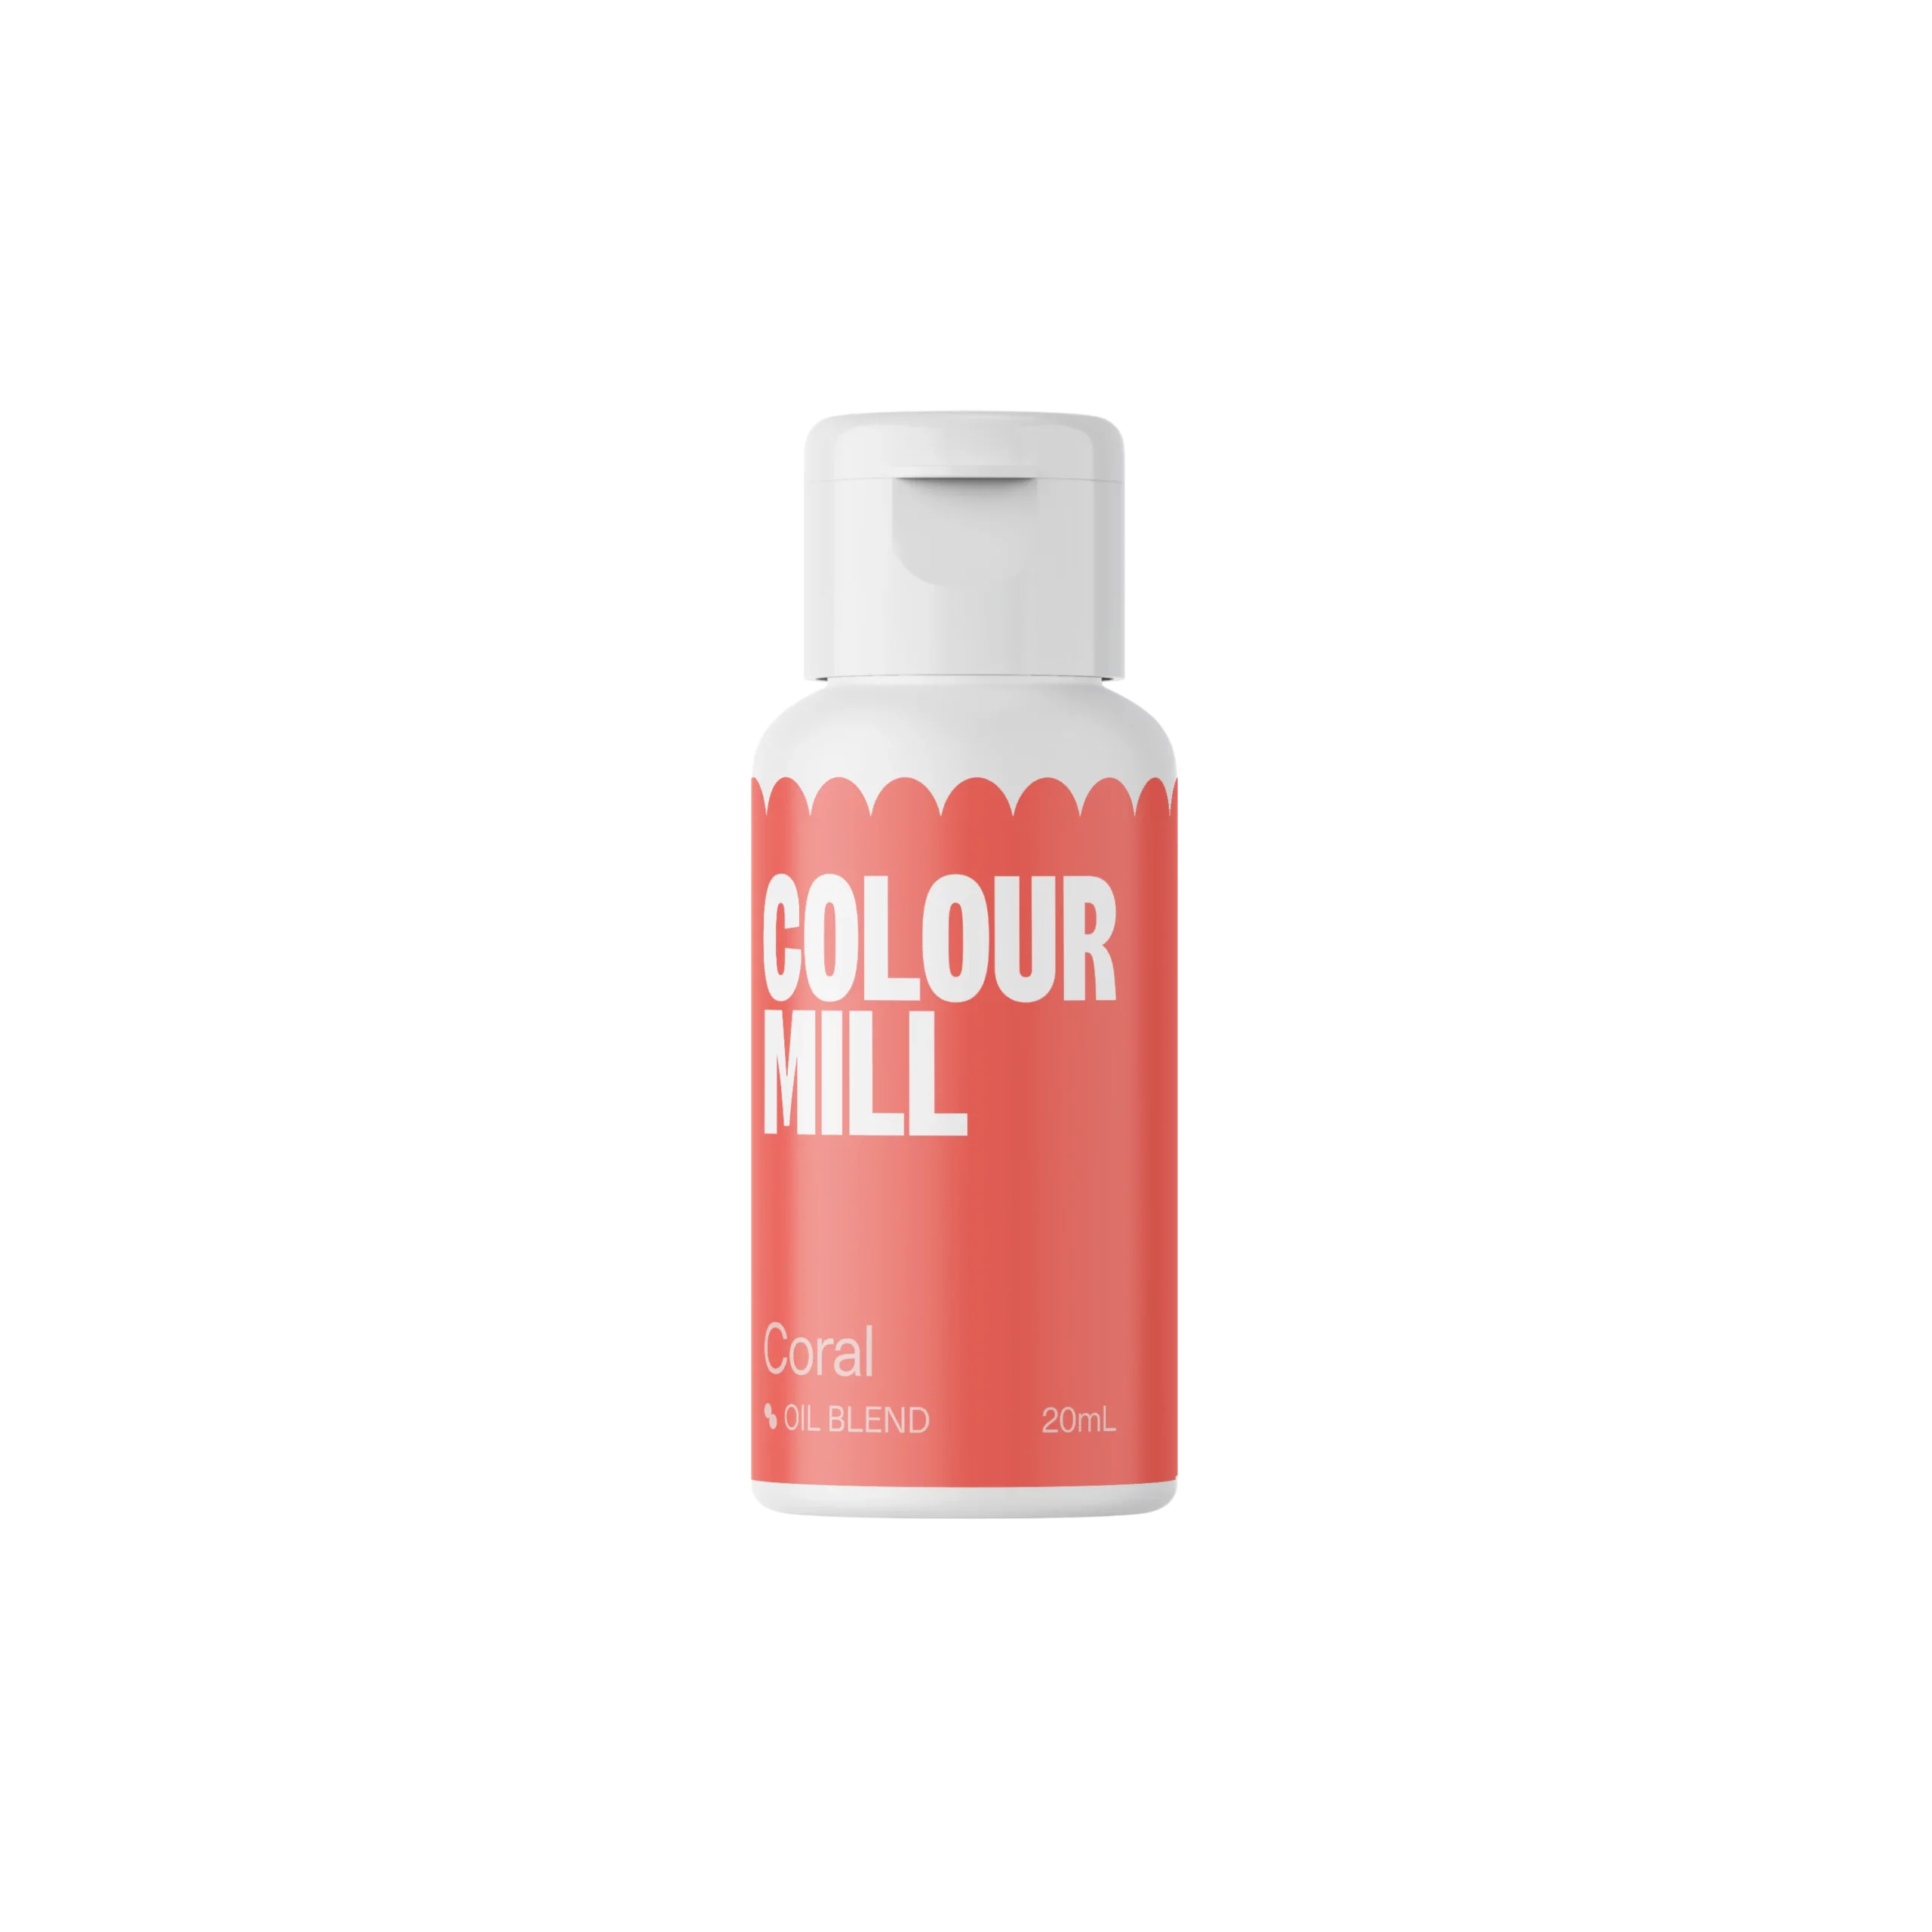 Coral-20ml